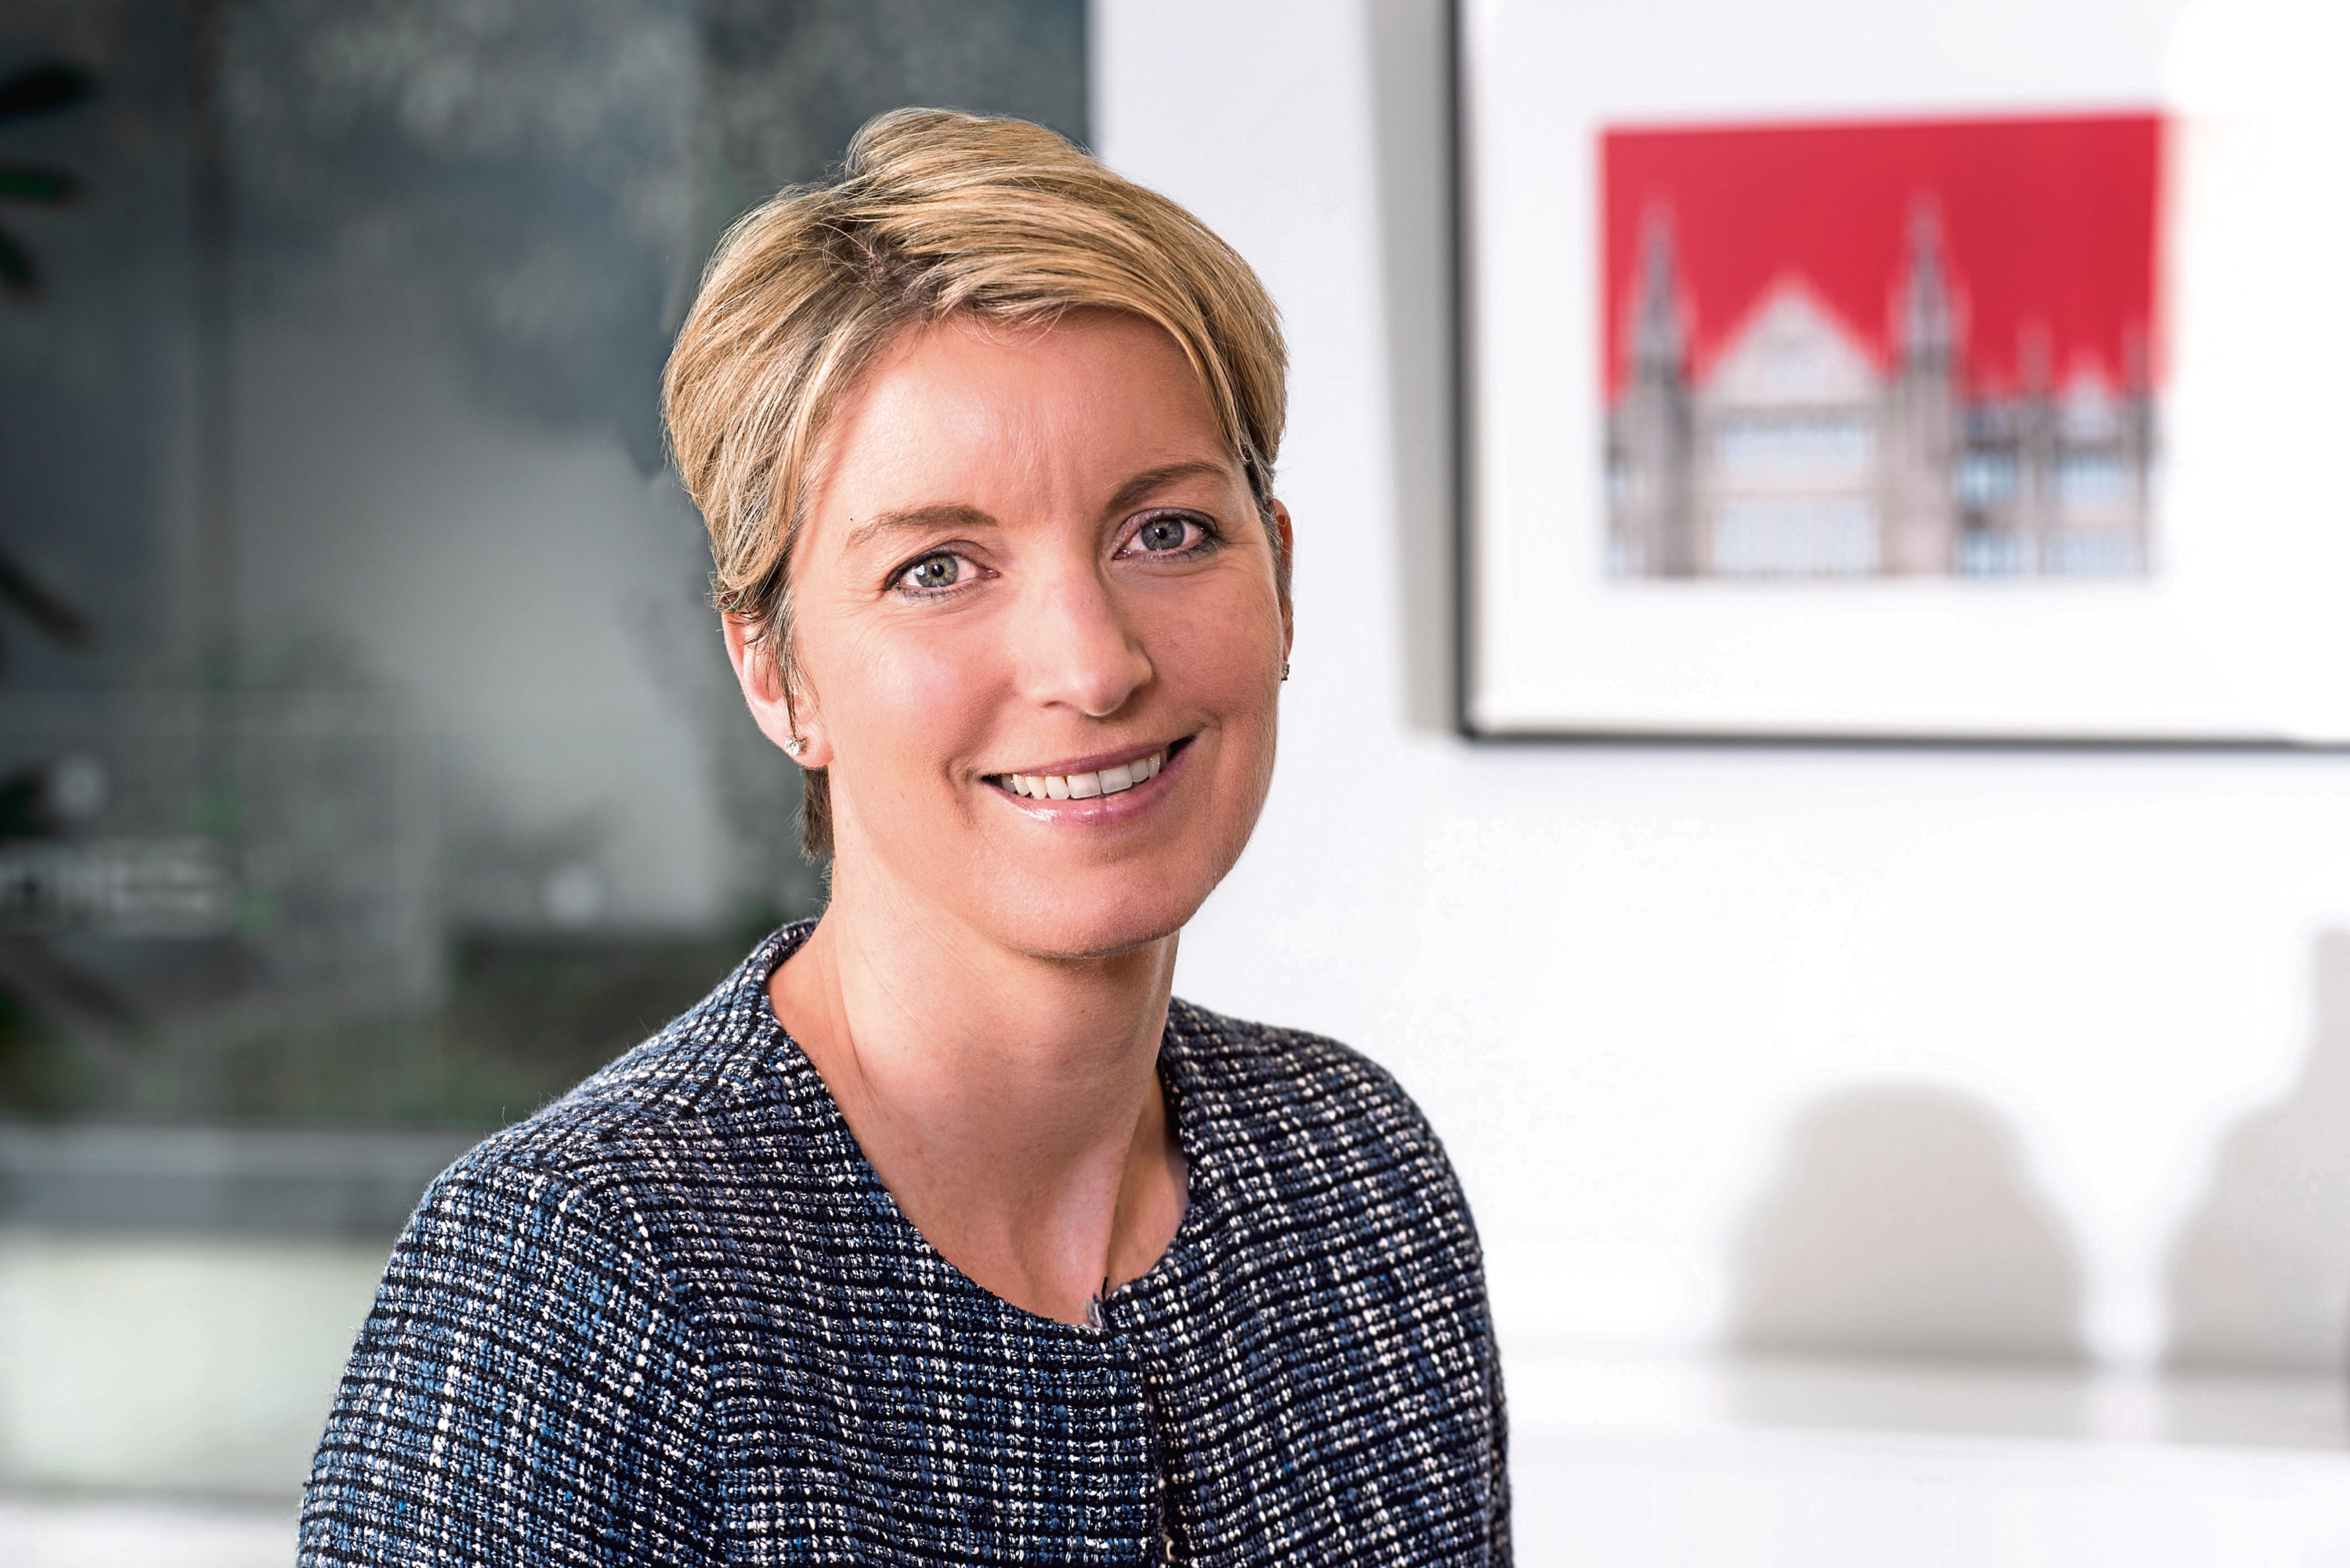 Clare Munro, Head of Energy and Infrastructure at Brodies LLP.